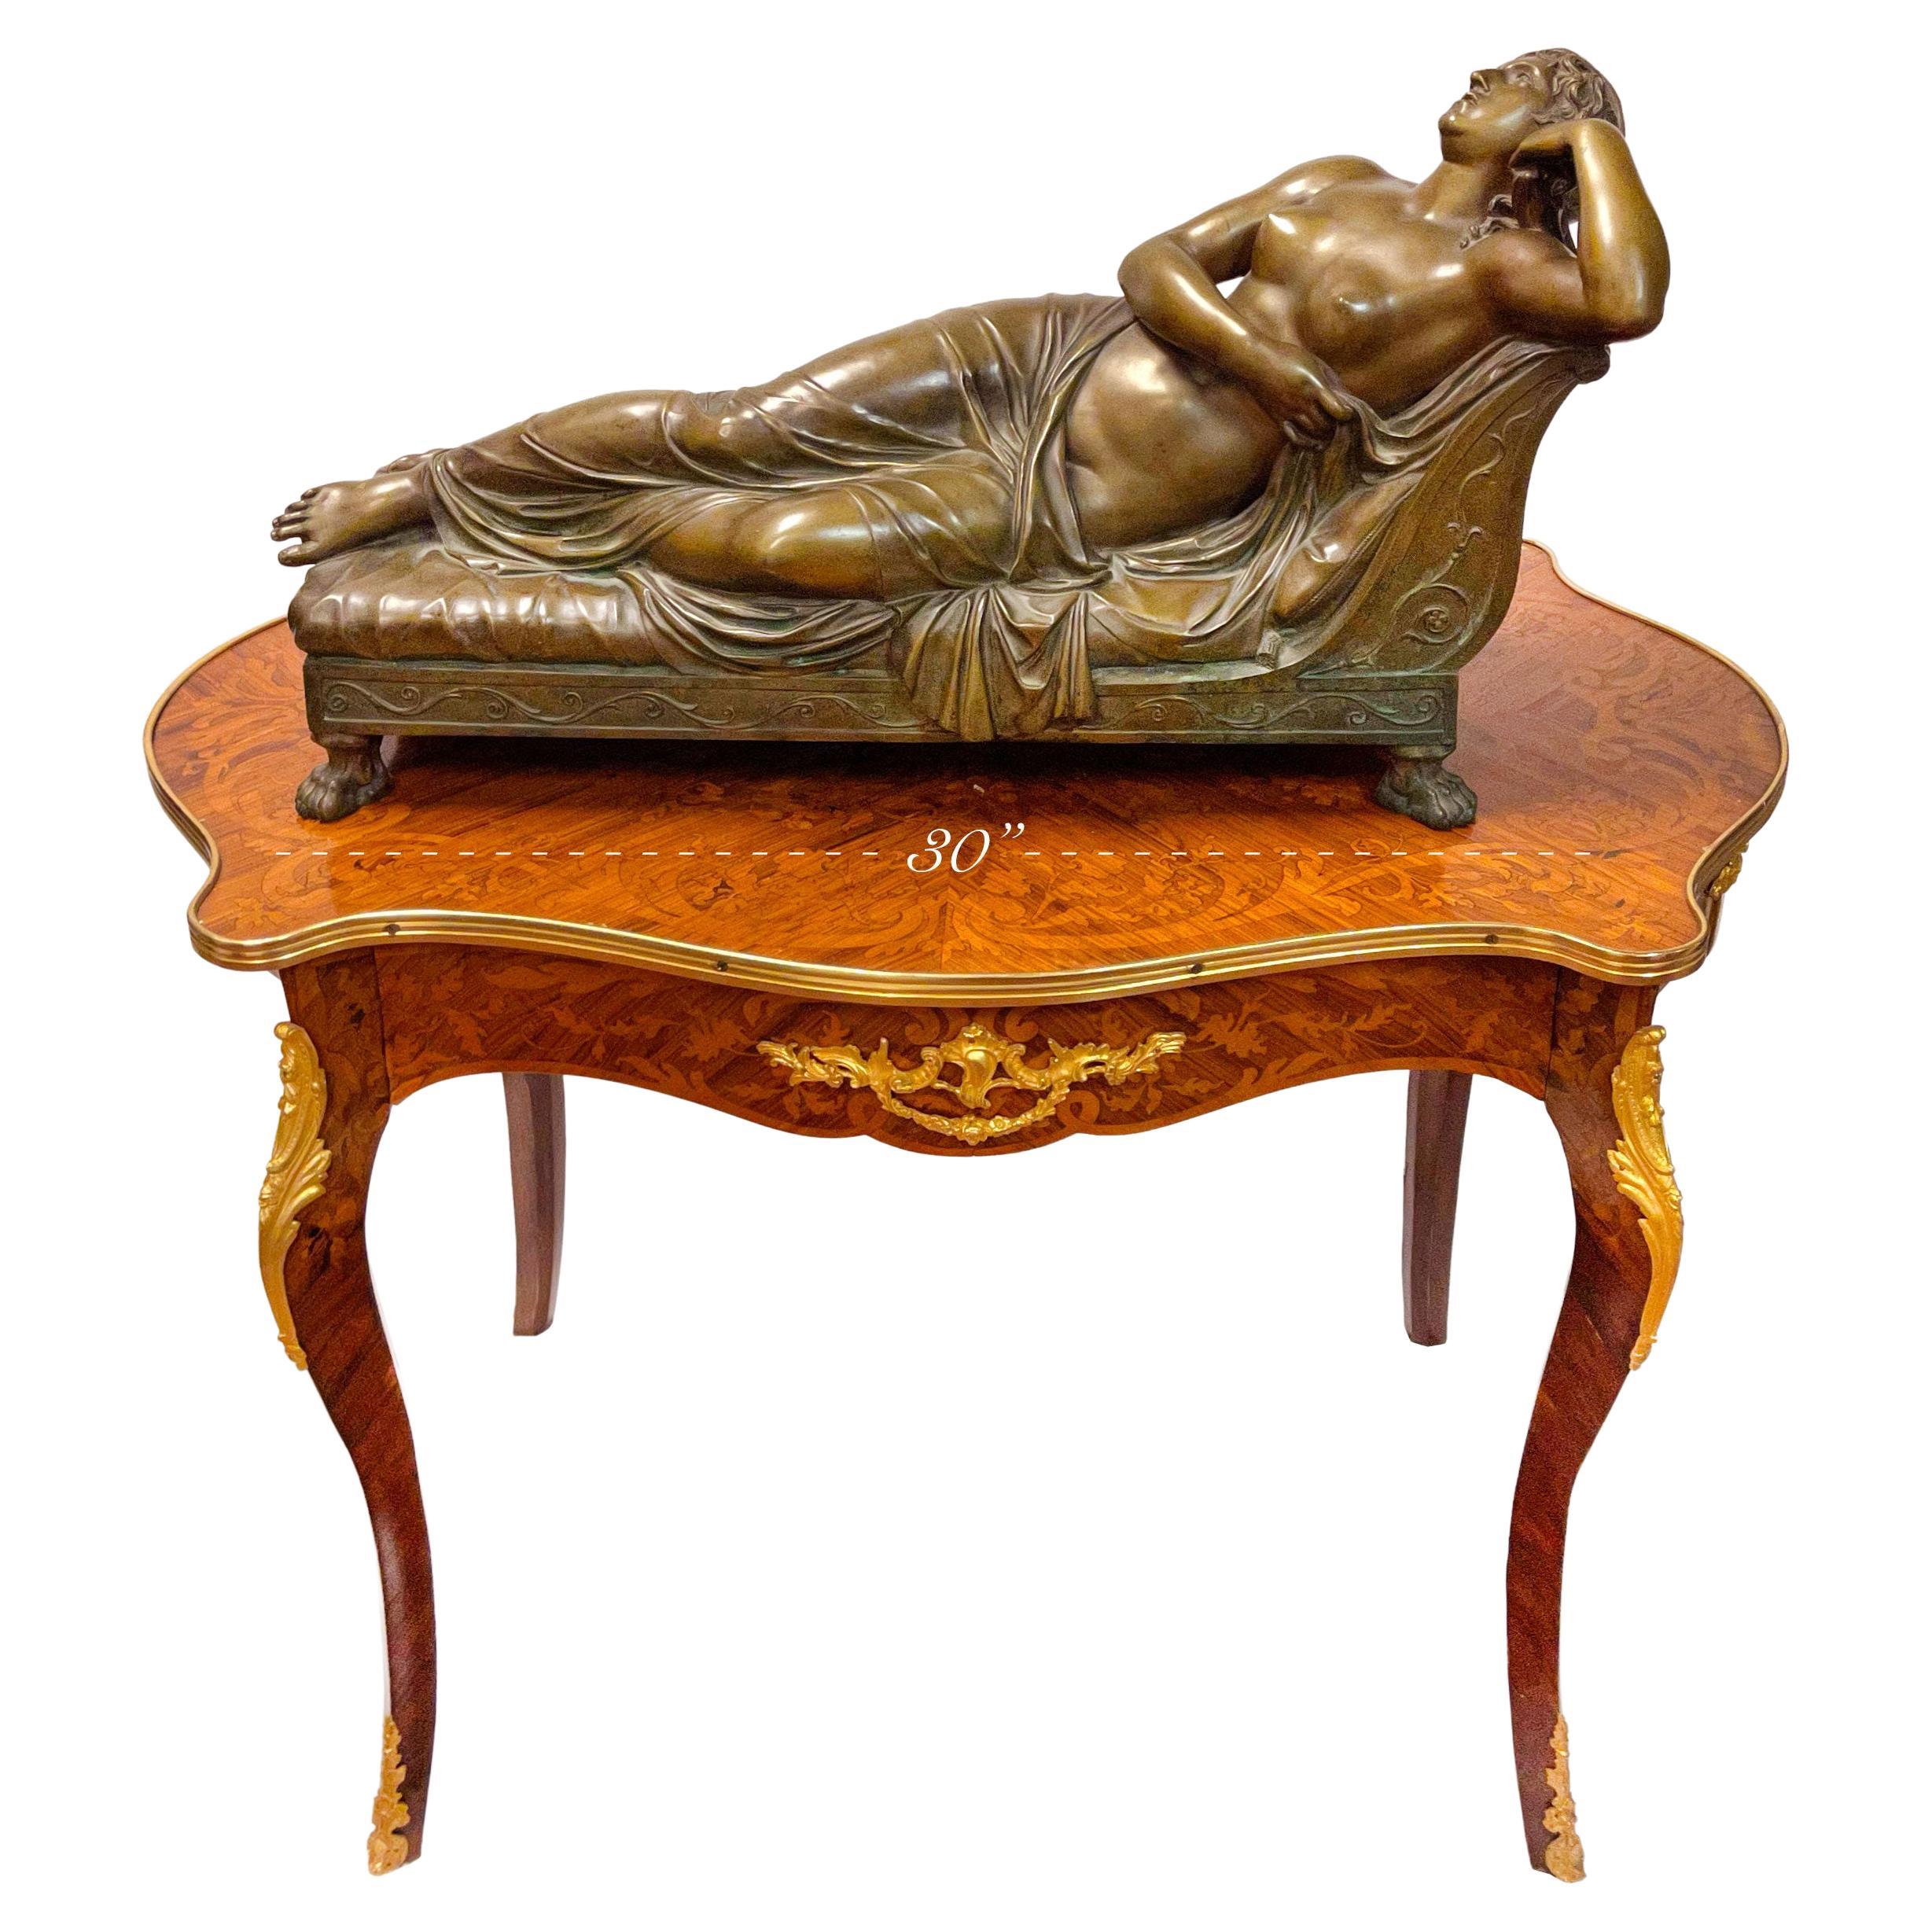 19th Century French Reclining Nude Patinated Bronze Sculpture